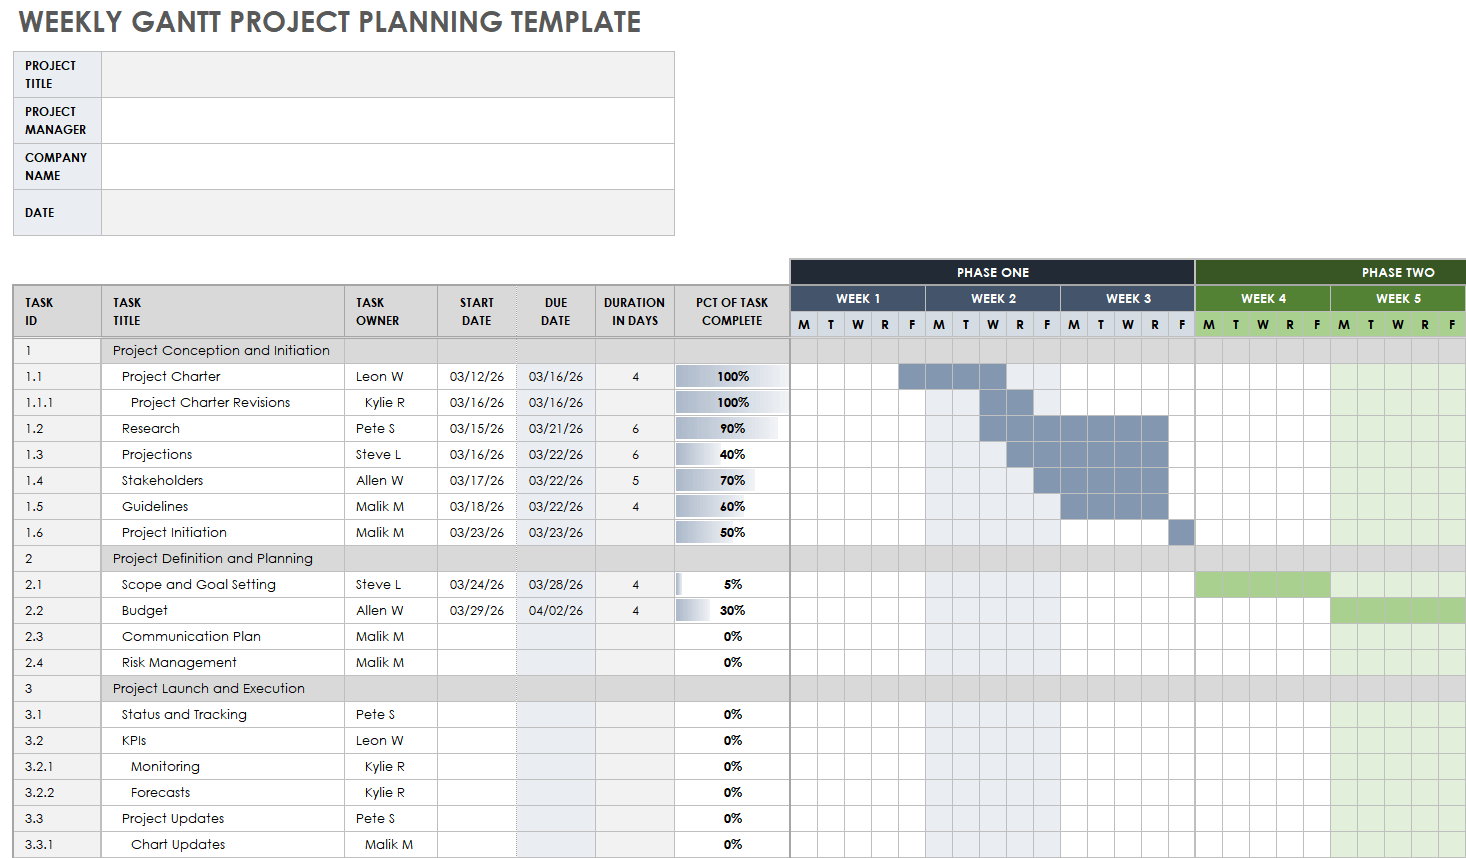 Weekly Gantt Project Planning Template